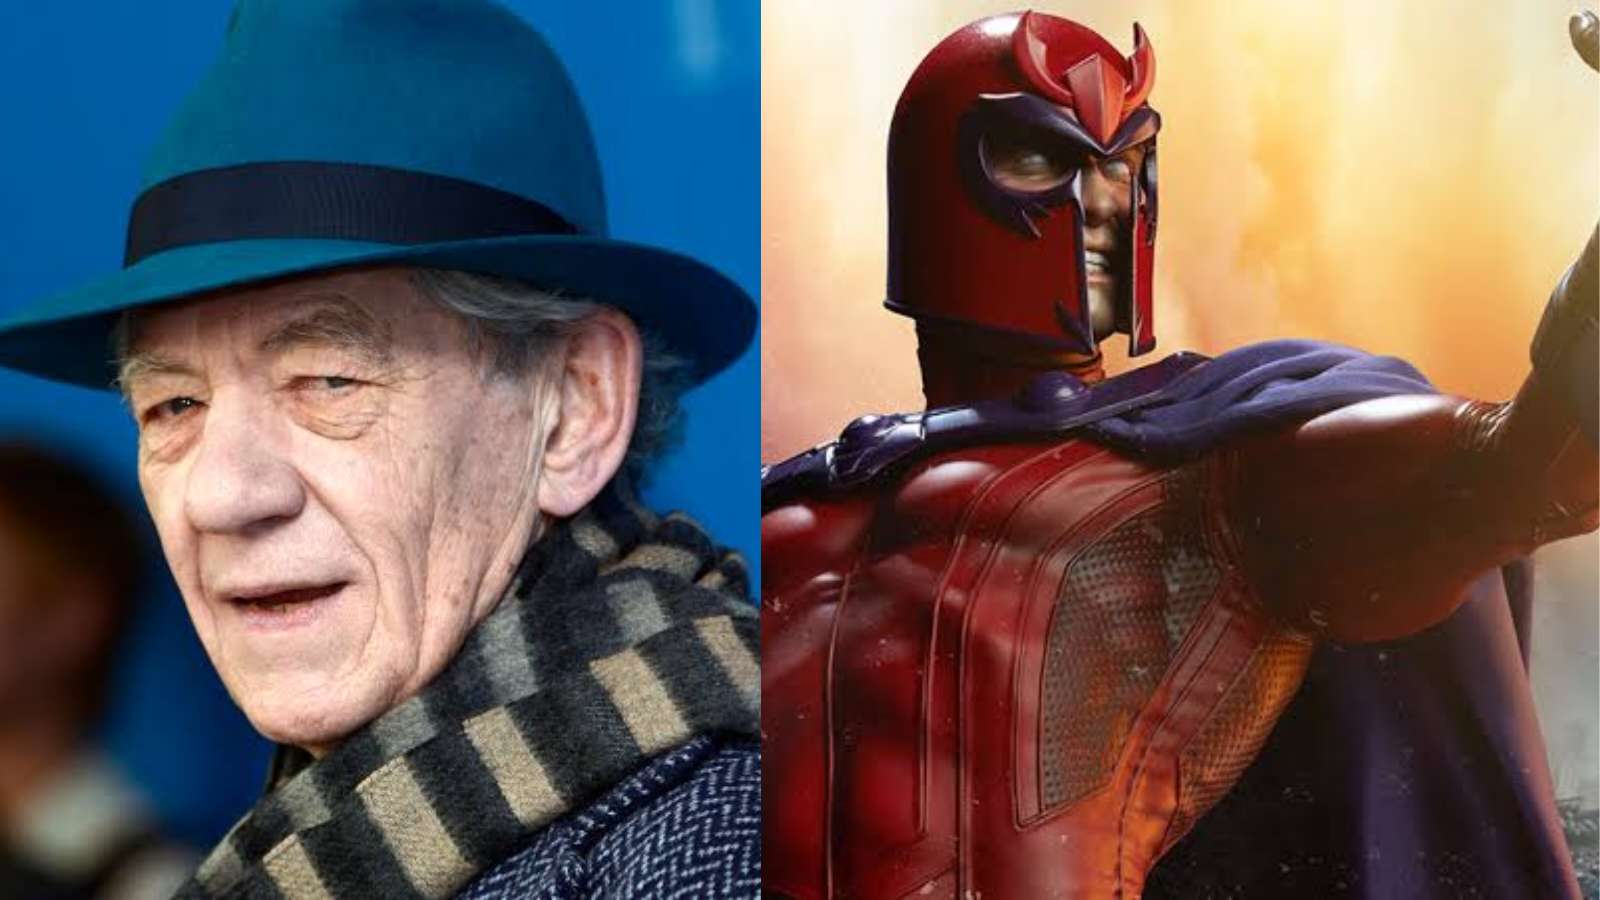 Ian McKellen as Magneto, Scarlet Witch's father